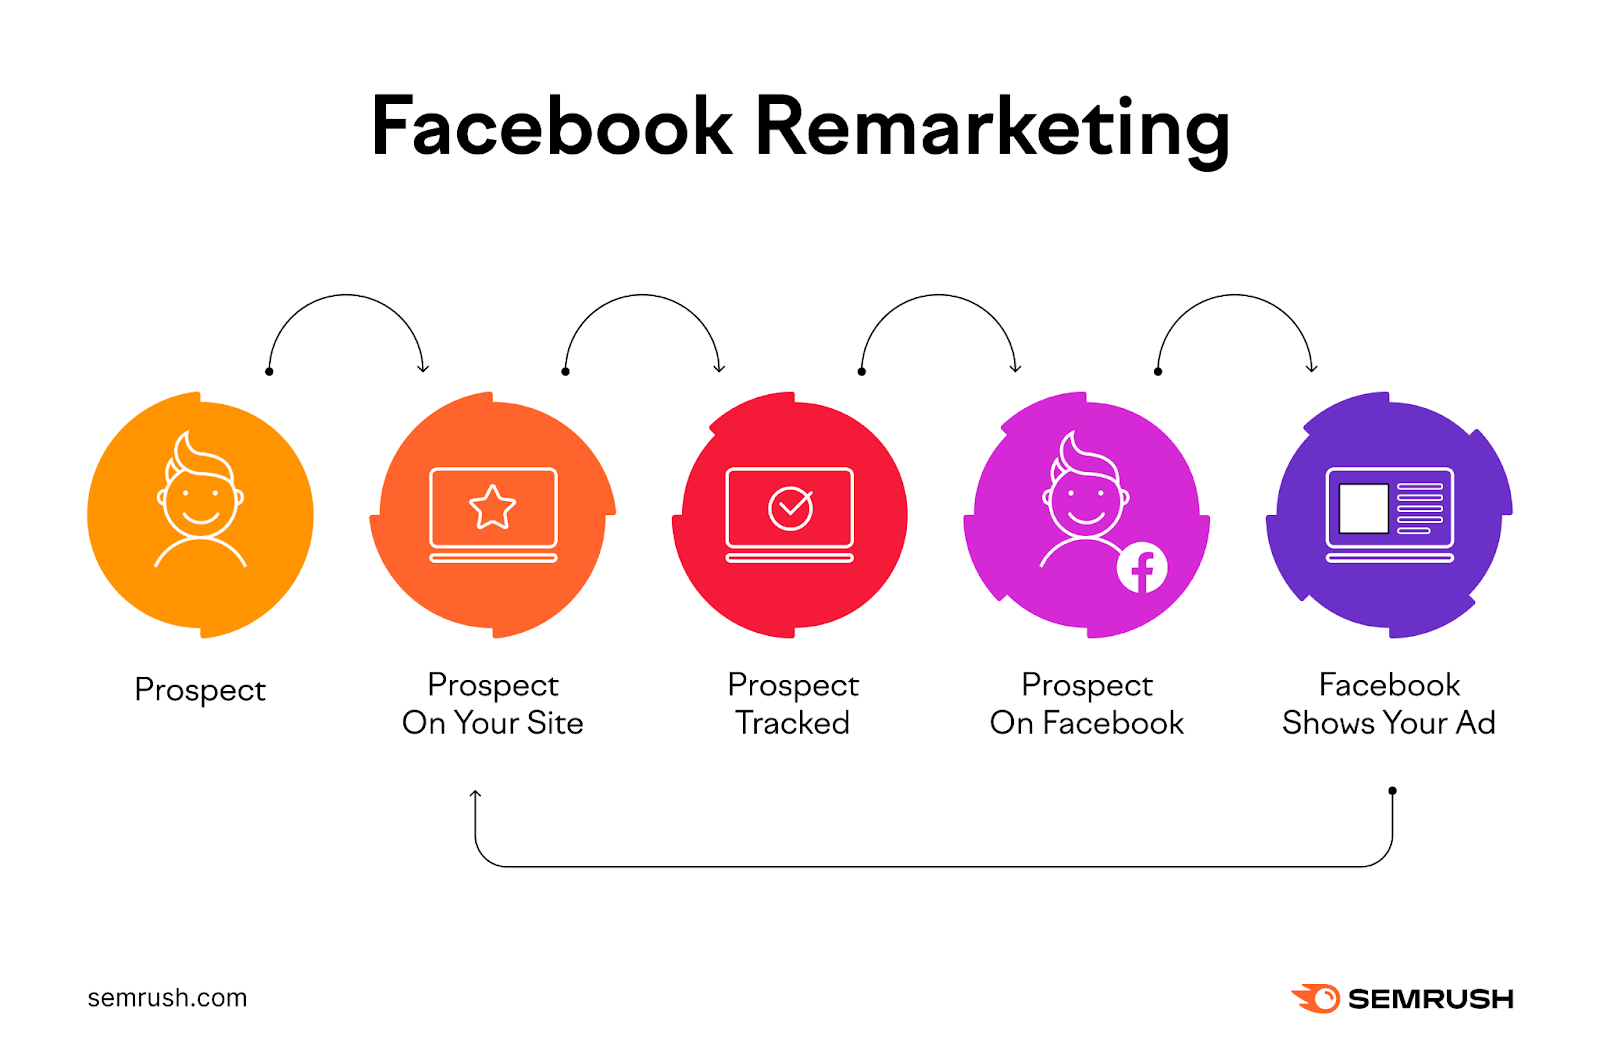 An infographic showing how Facebook remarketing works